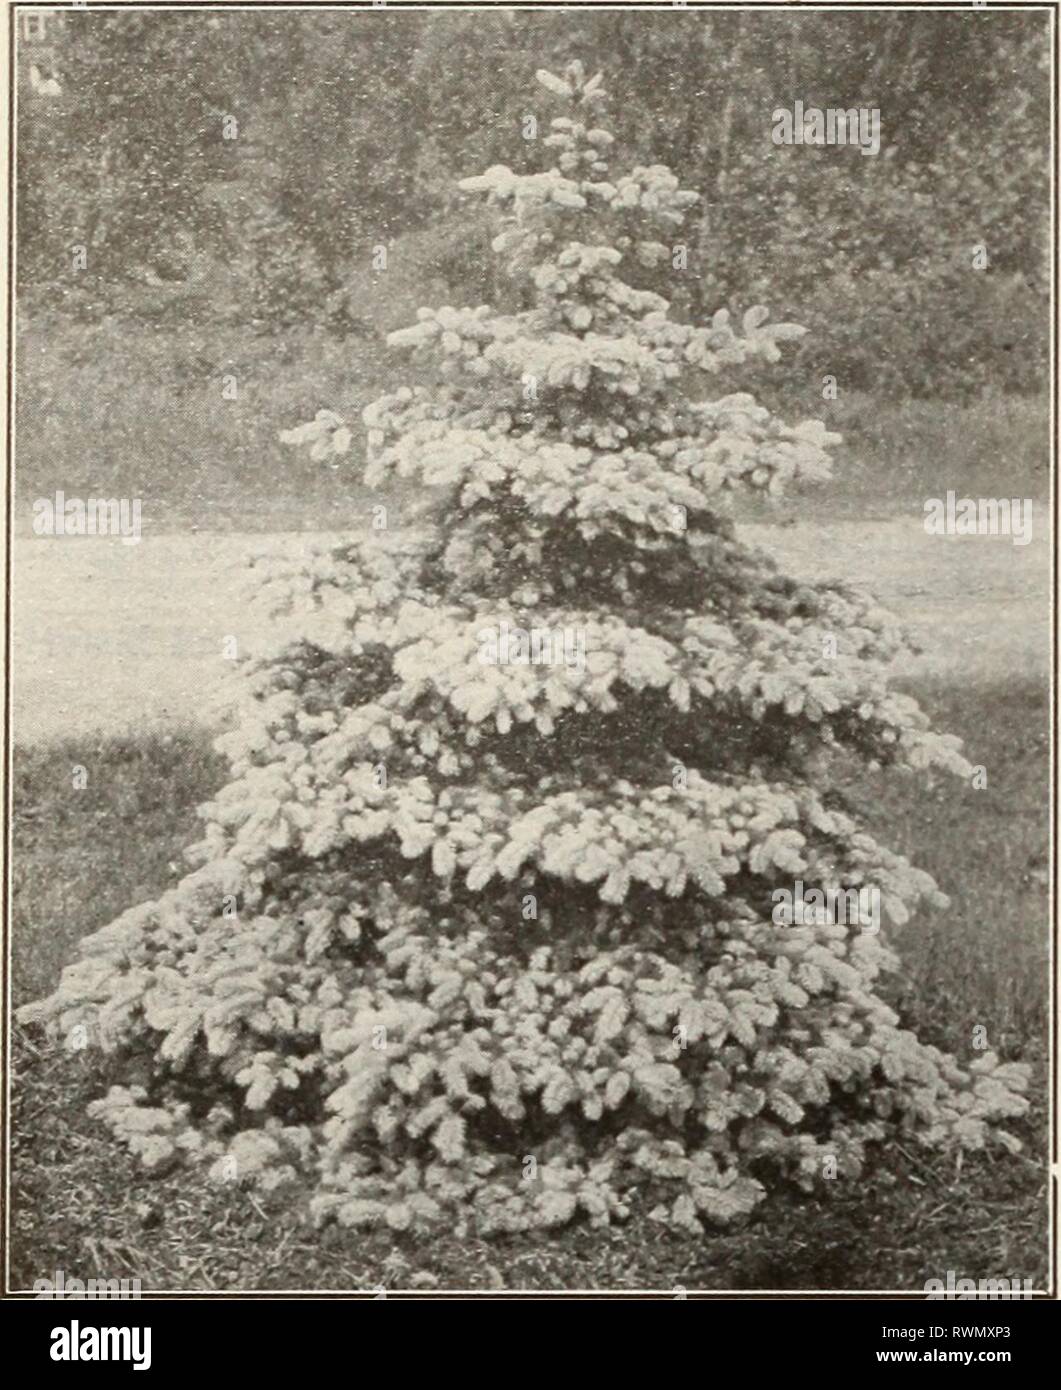 Ellwanger & Barry Mt Hope Ellwanger & Barry Mt Hope Nurseries ellwangerbarrymt1918moun Year: 1918  PICEA-SPRUCE-Con/inueJ Alcocquiana. Alcock's Spruce. B. From Japan. It forms a beautiful tree of close habit. Foliage pale green, silvery underneath. Valu- able. 2 ft., $2.00 each.    ROSTER'S BLUE SPRUCE « P. Douglasii. Douglas' Spruce. C. From Col- orado. Large, conical form; branches spread- ing, horizontal; leaves light green above, glau- cous below. A valuable evergreen tree. 2 to 3 ft., $1.50 each. 3 to 4 ft., $2.00 each. P. excelsa. Norway Spruce. A. From Europe. An elegant tree; extremely Stock Photo